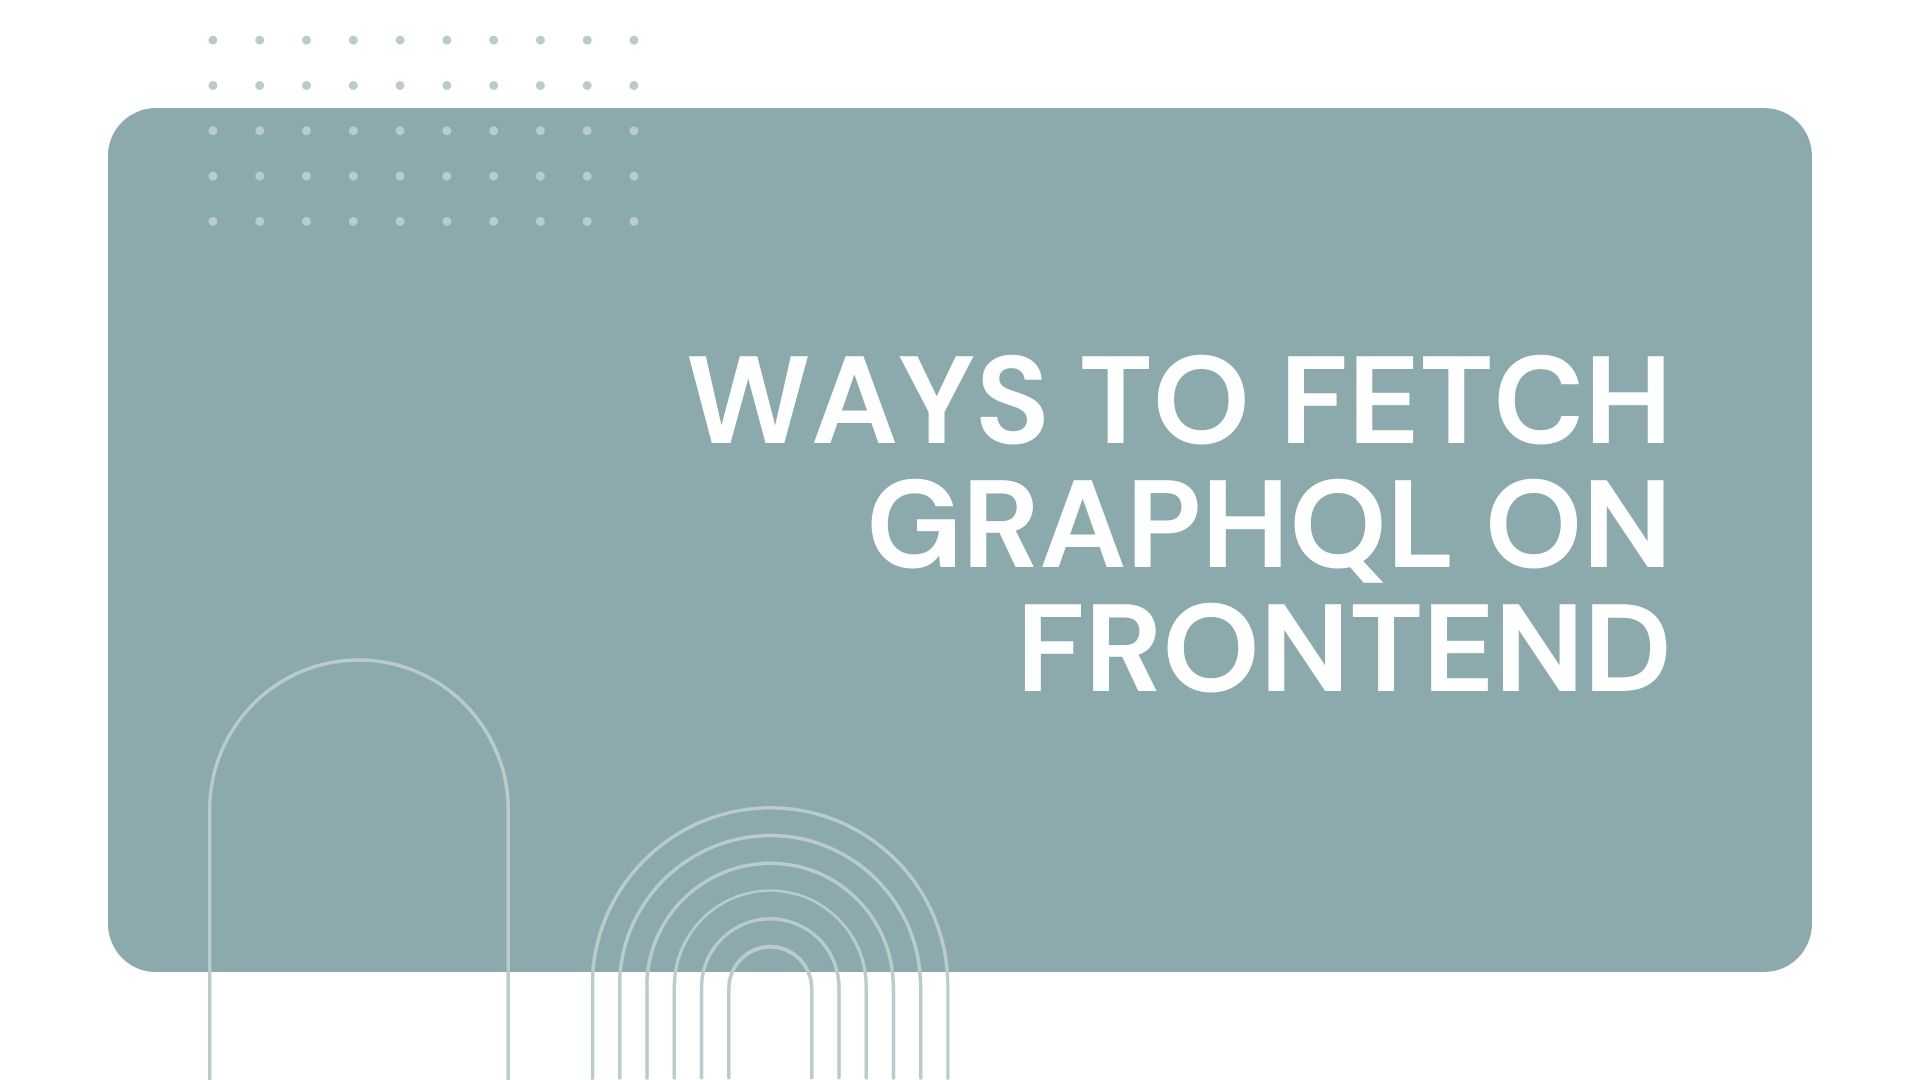 Ways to fetch GraphQL on Frontend - Featured image